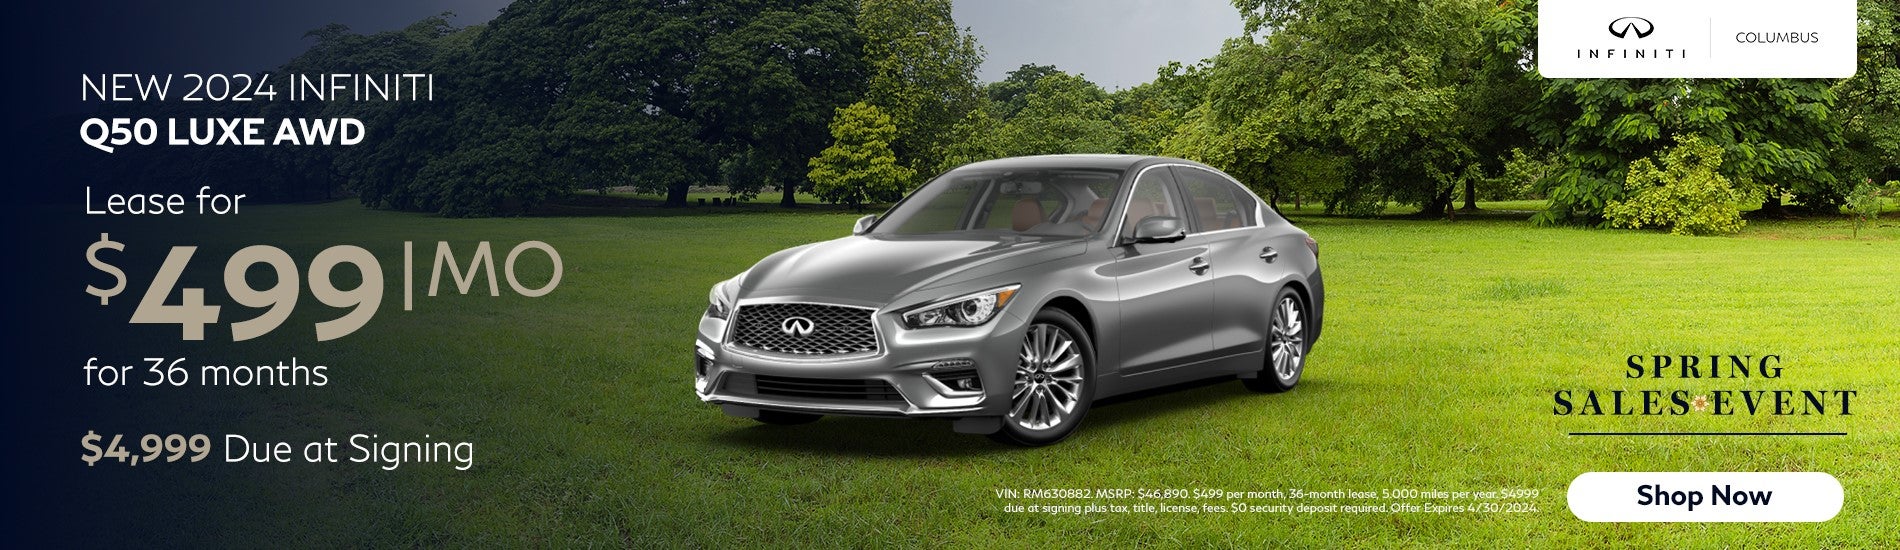 Lease Offer 2024 New Q50 Luxe Awd